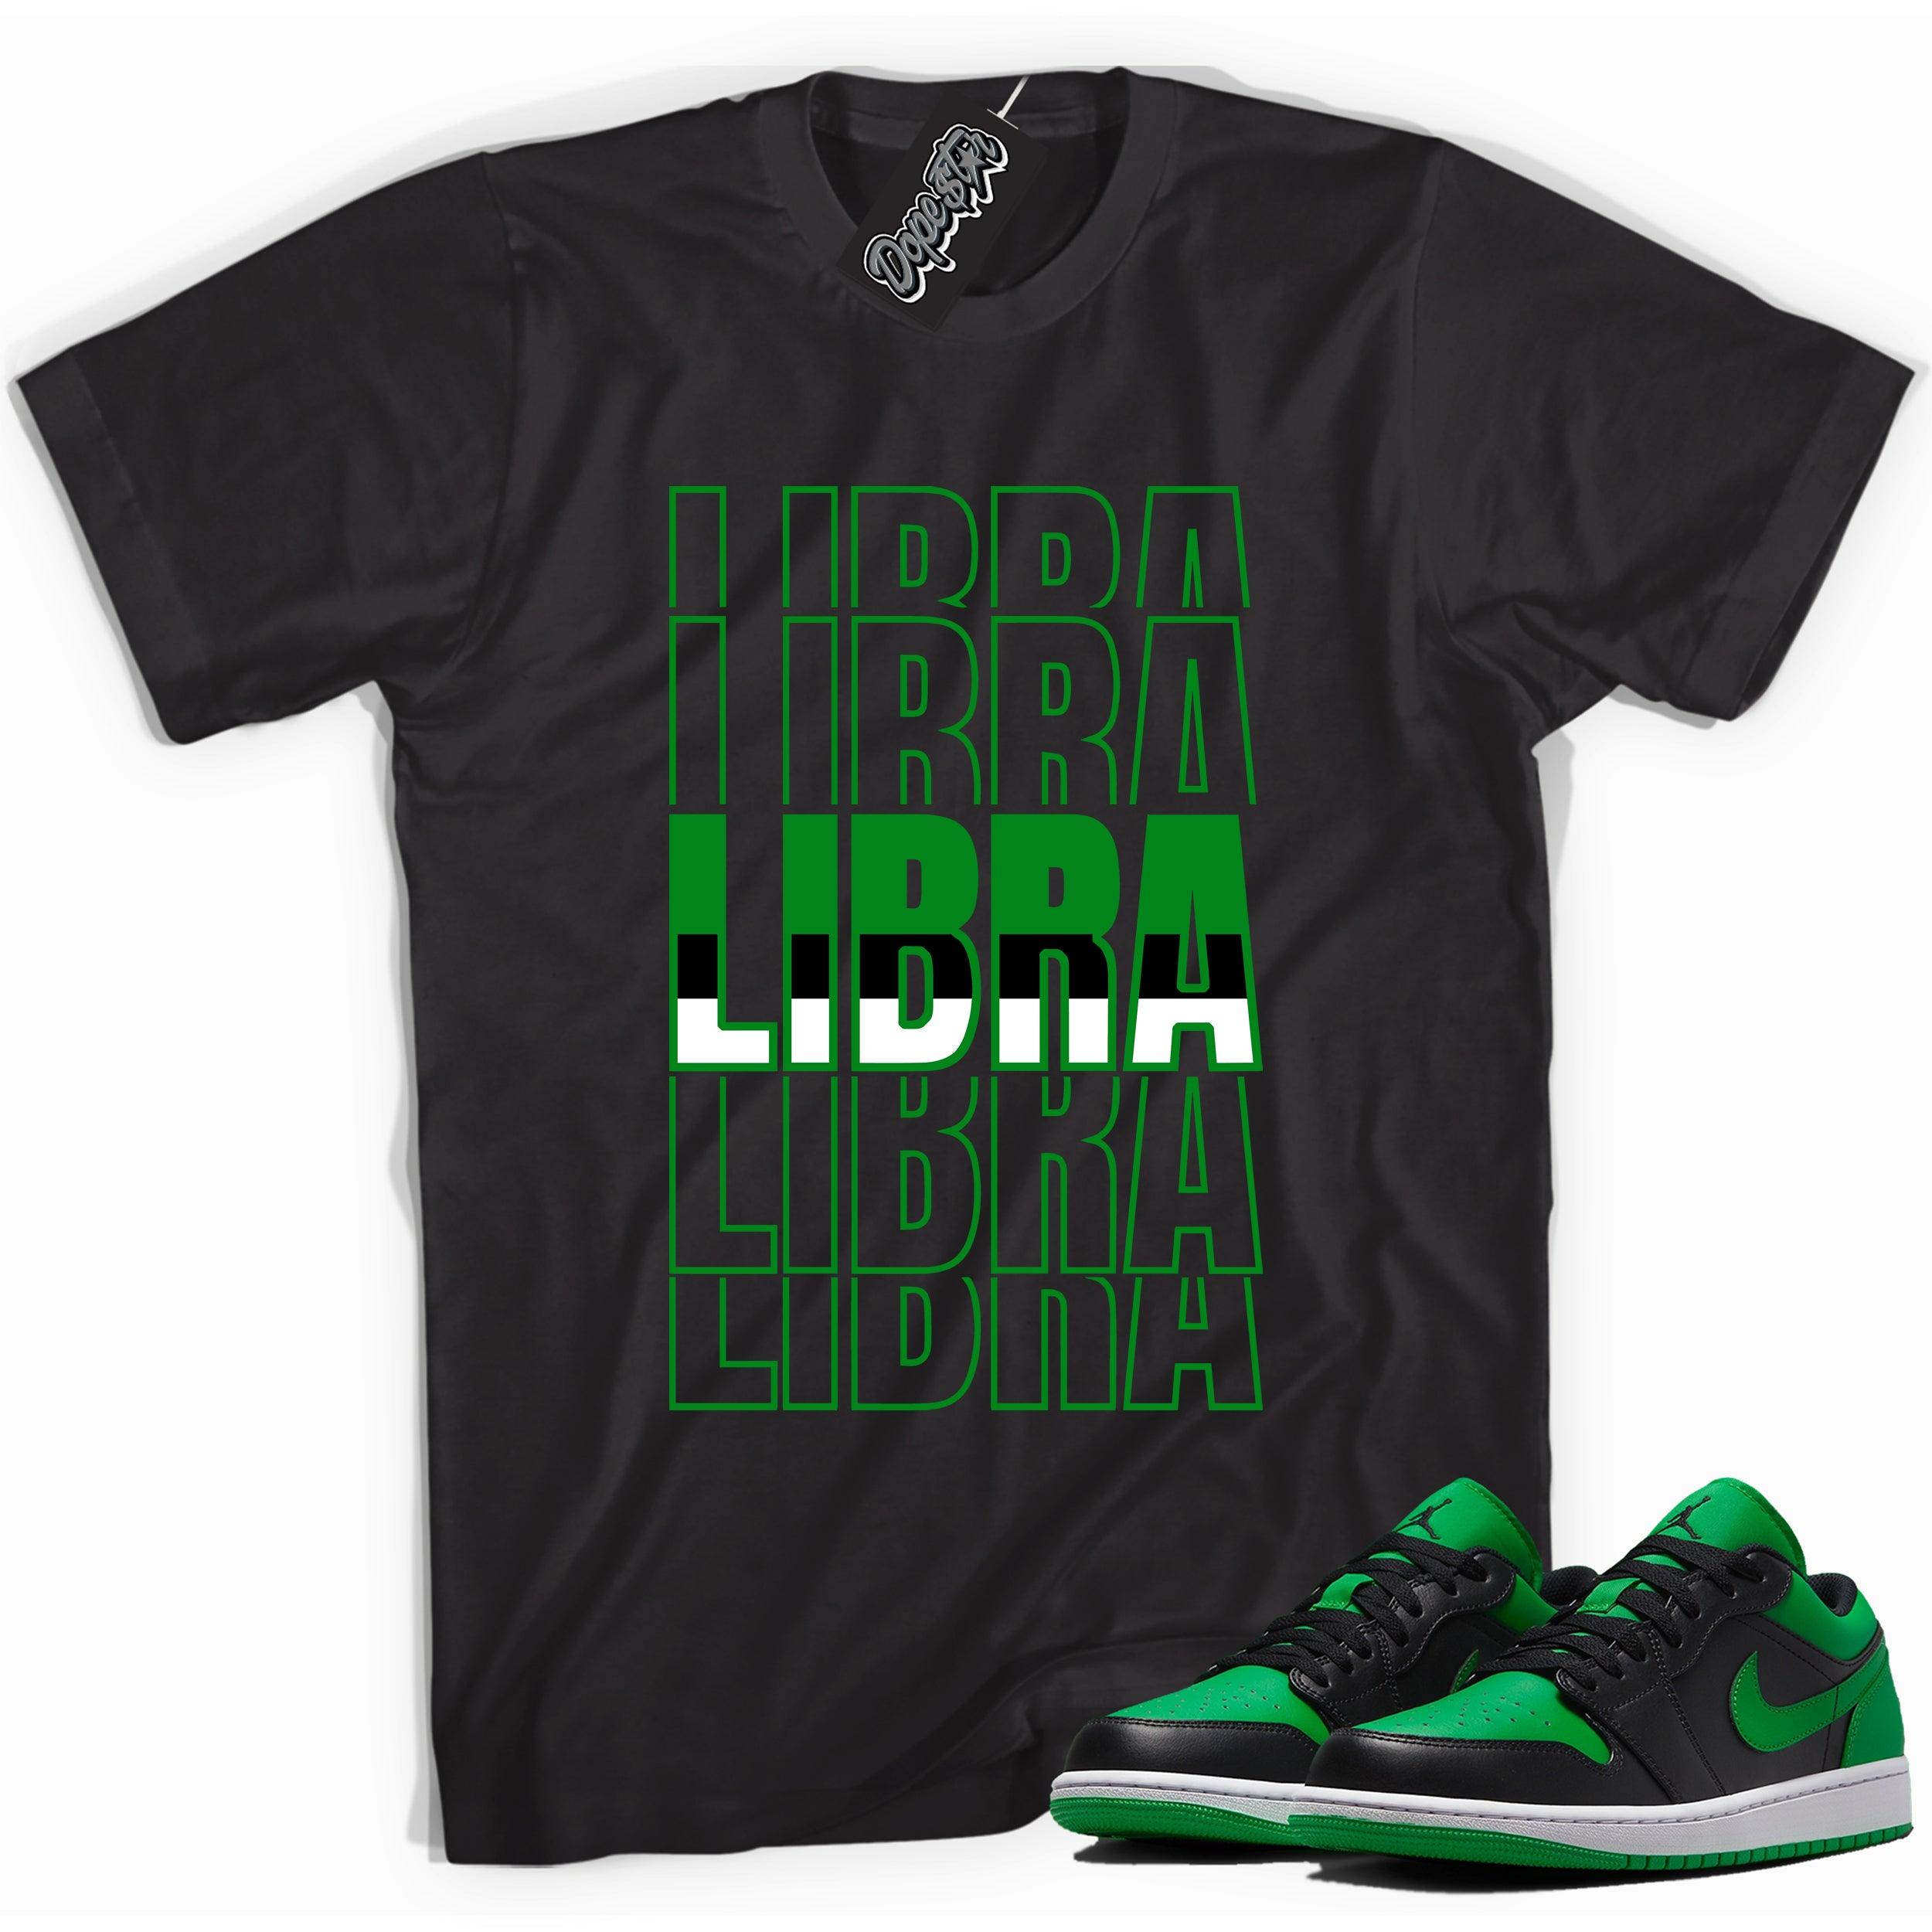 Cool black graphic tee with 'libra' print, that perfectly matches Air Jordan 1 Low Lucky Green sneakers